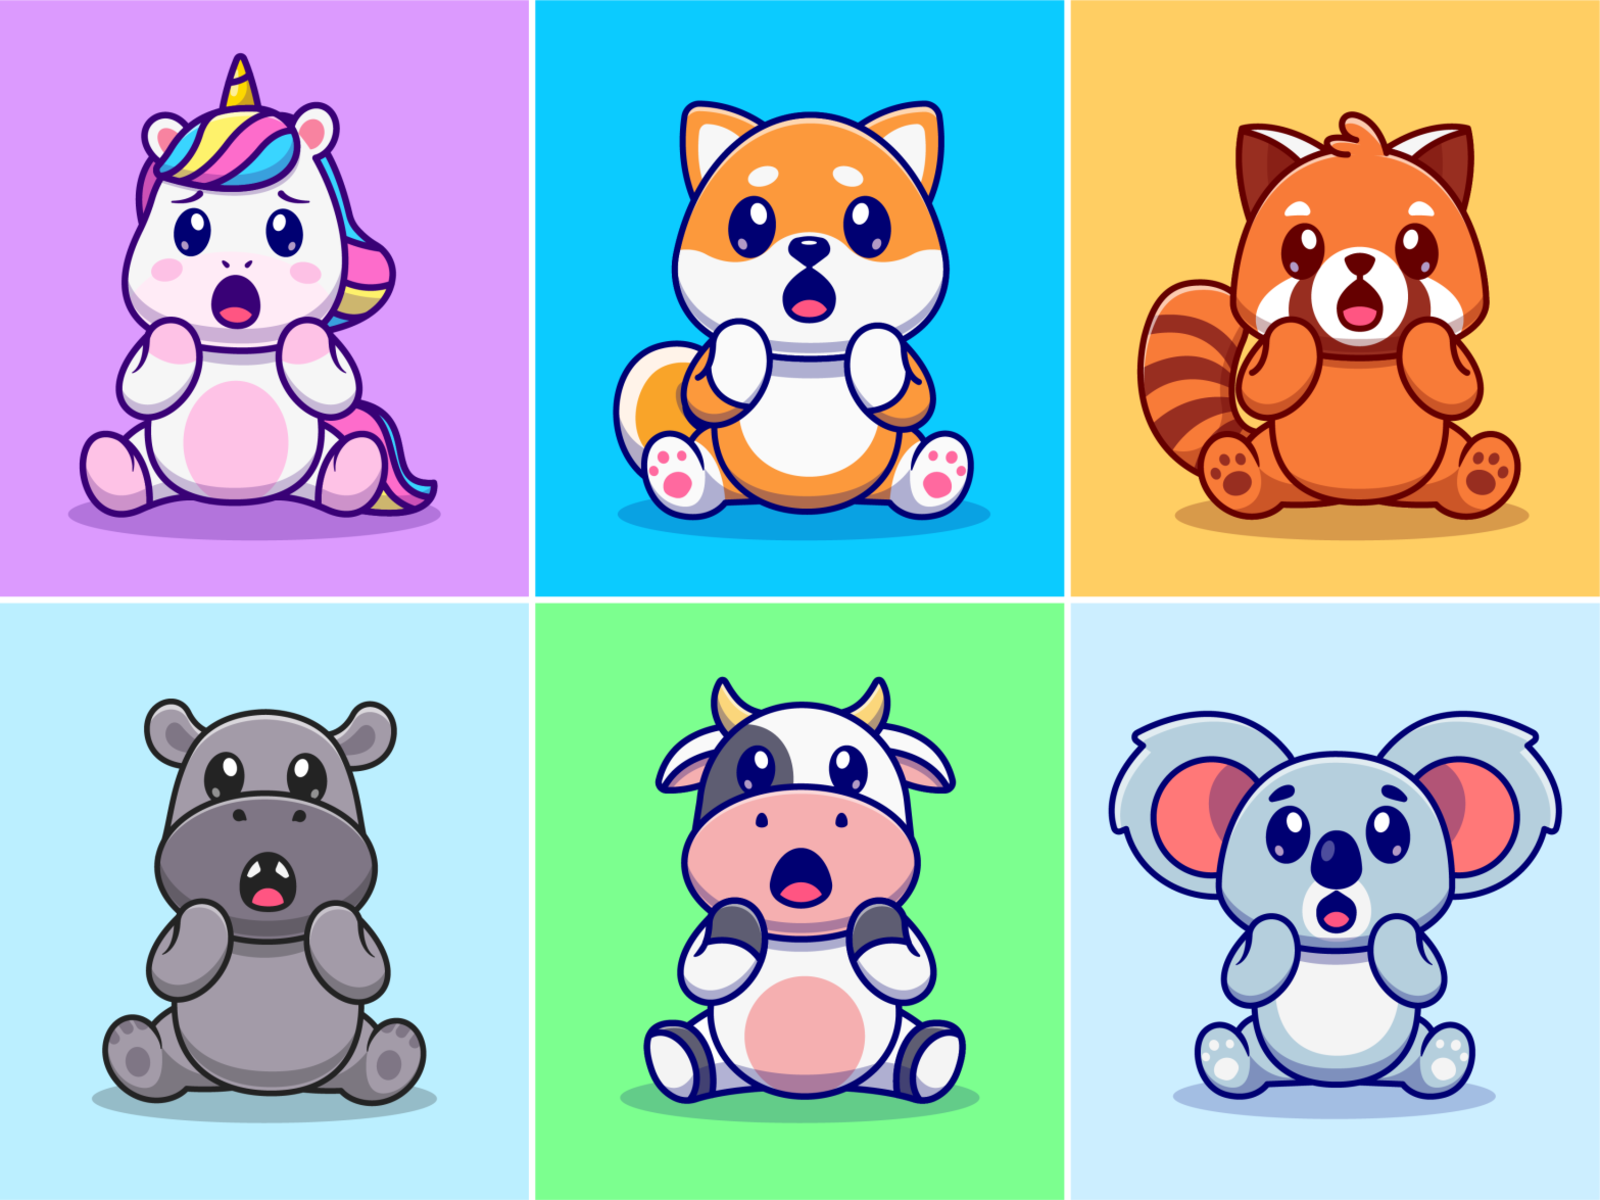 Cute animals surprised???????????????????? by catalyst on Dribbble